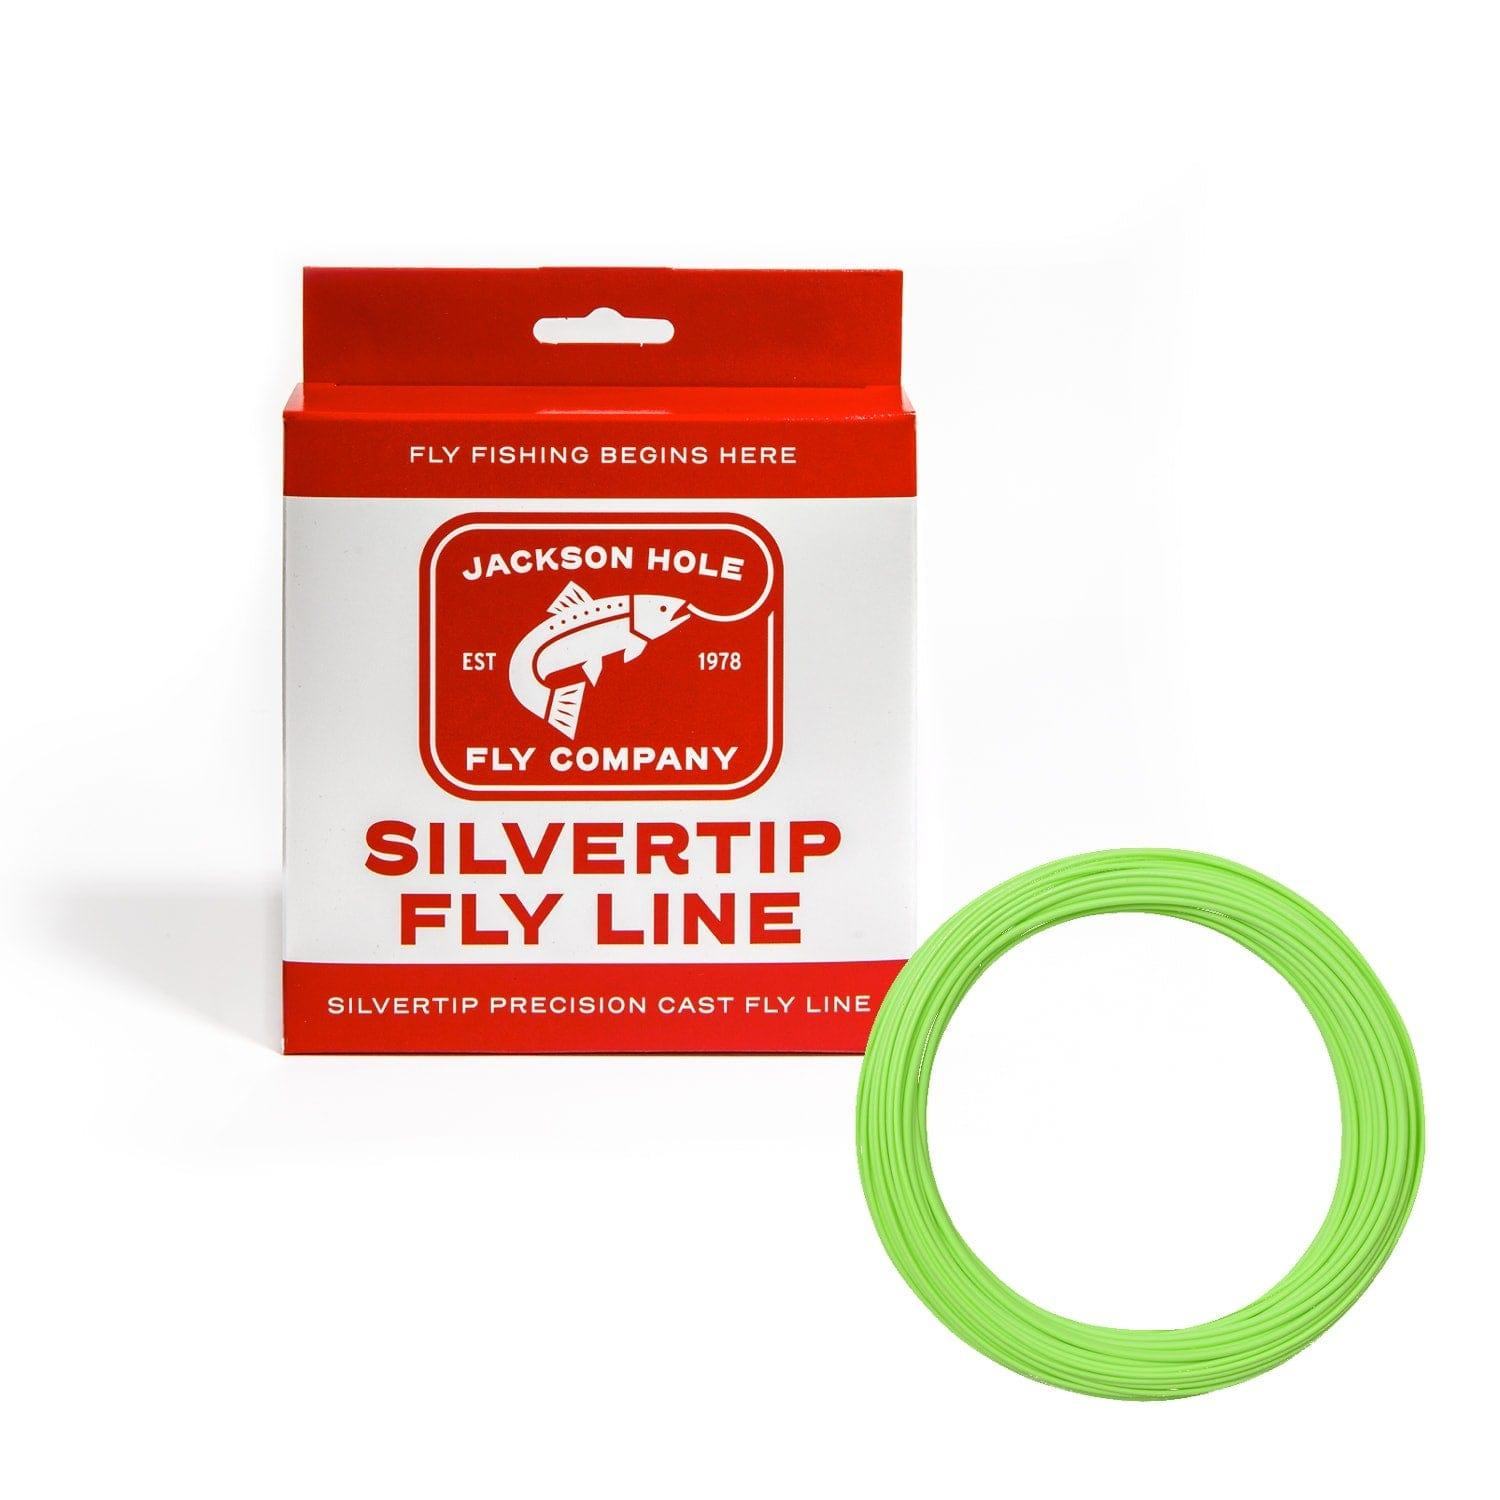 Silvertip 10' Sink Tip Weight Forward Fly Line – Jackson Hole Fly Company